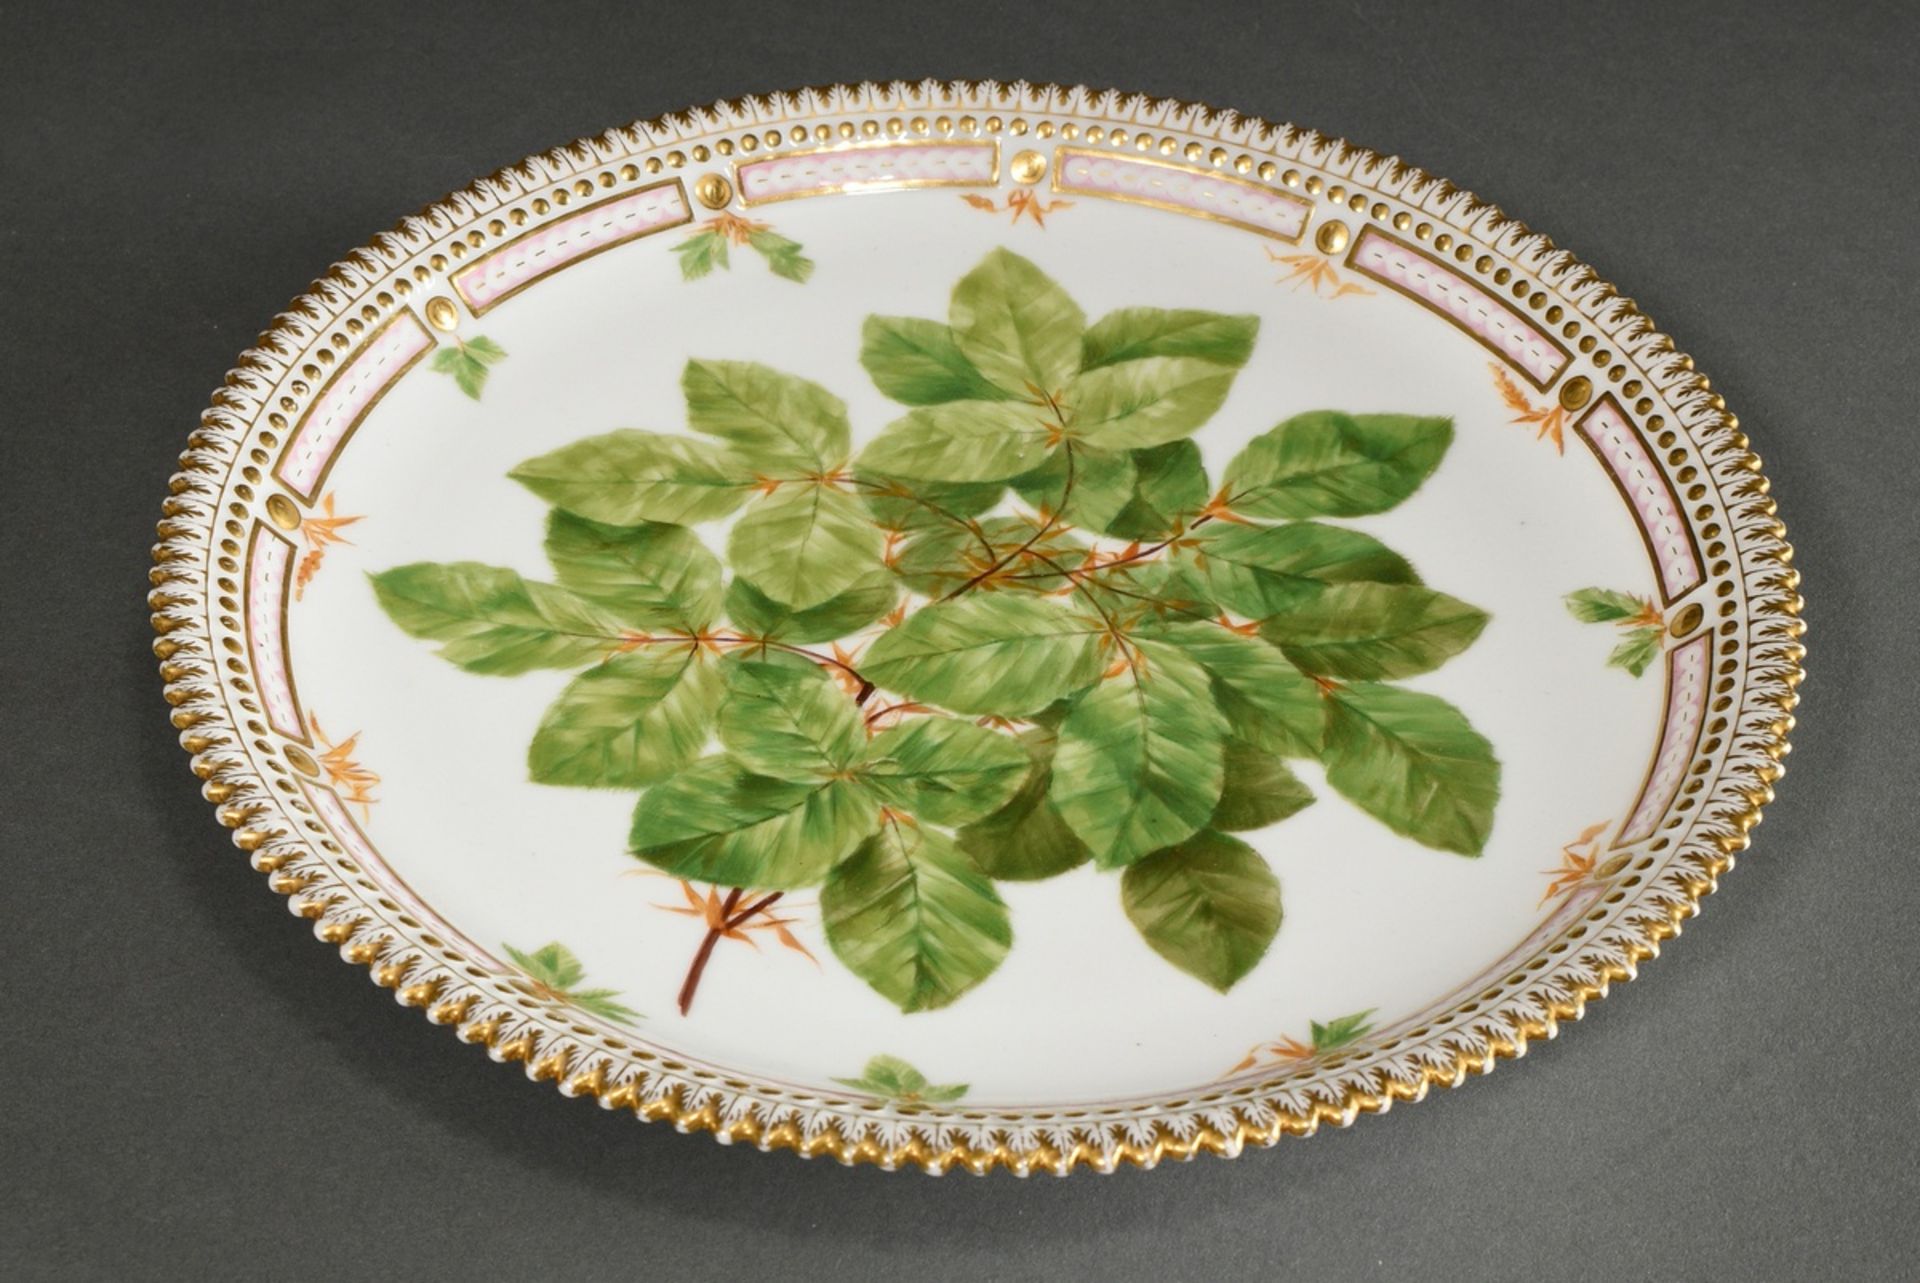 Royal Copenhagen plate with "beech leaves" in mirror, gold staffage and serrated rim, 19th c., Ø 24 - Image 2 of 4